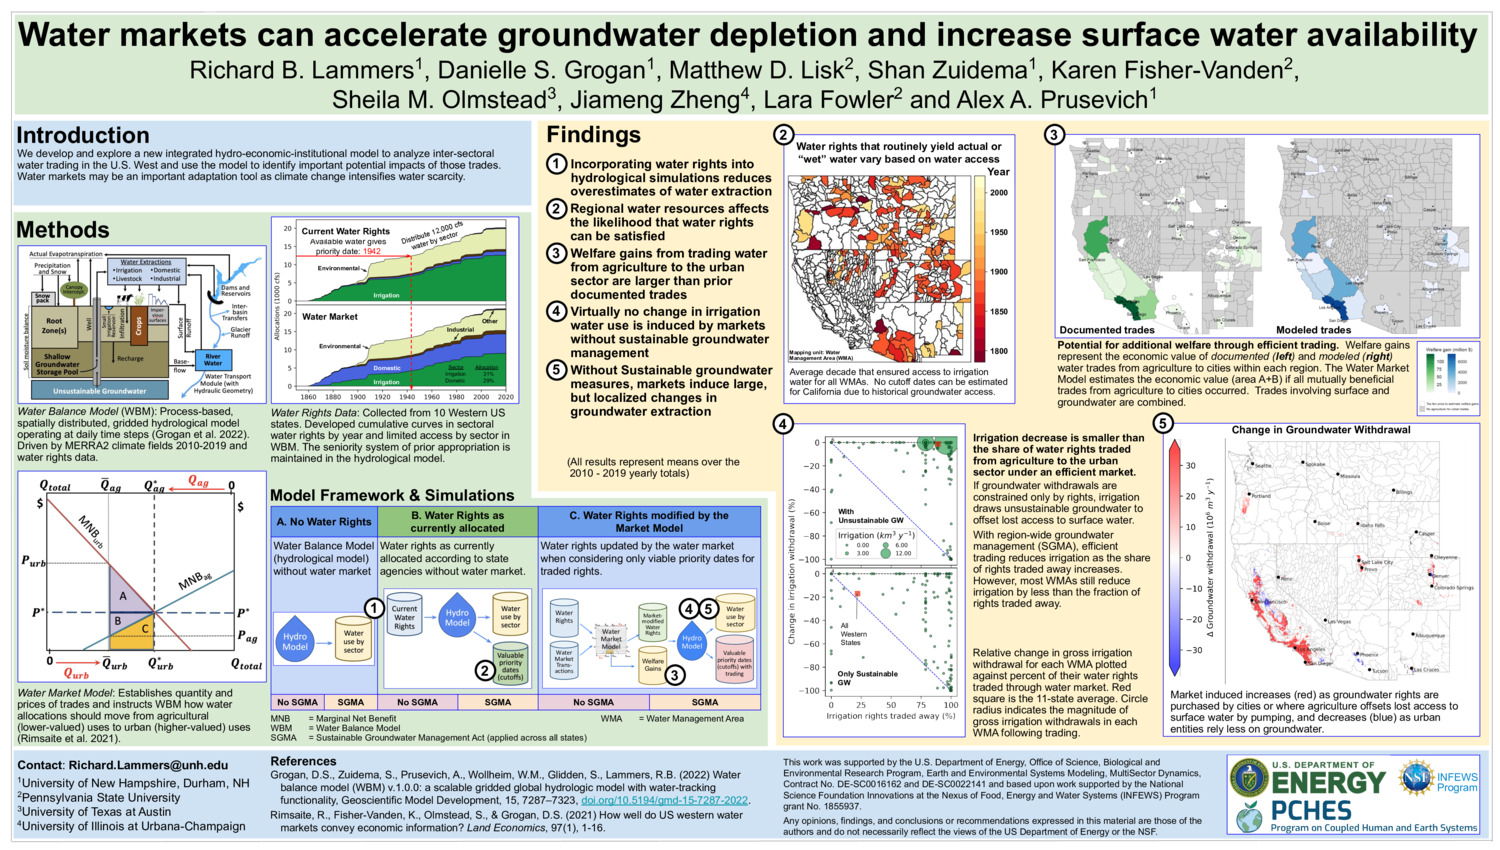 Water Markets Can Accelerate Groundwater Depletion And Increase Surface Water Availability by szuidema